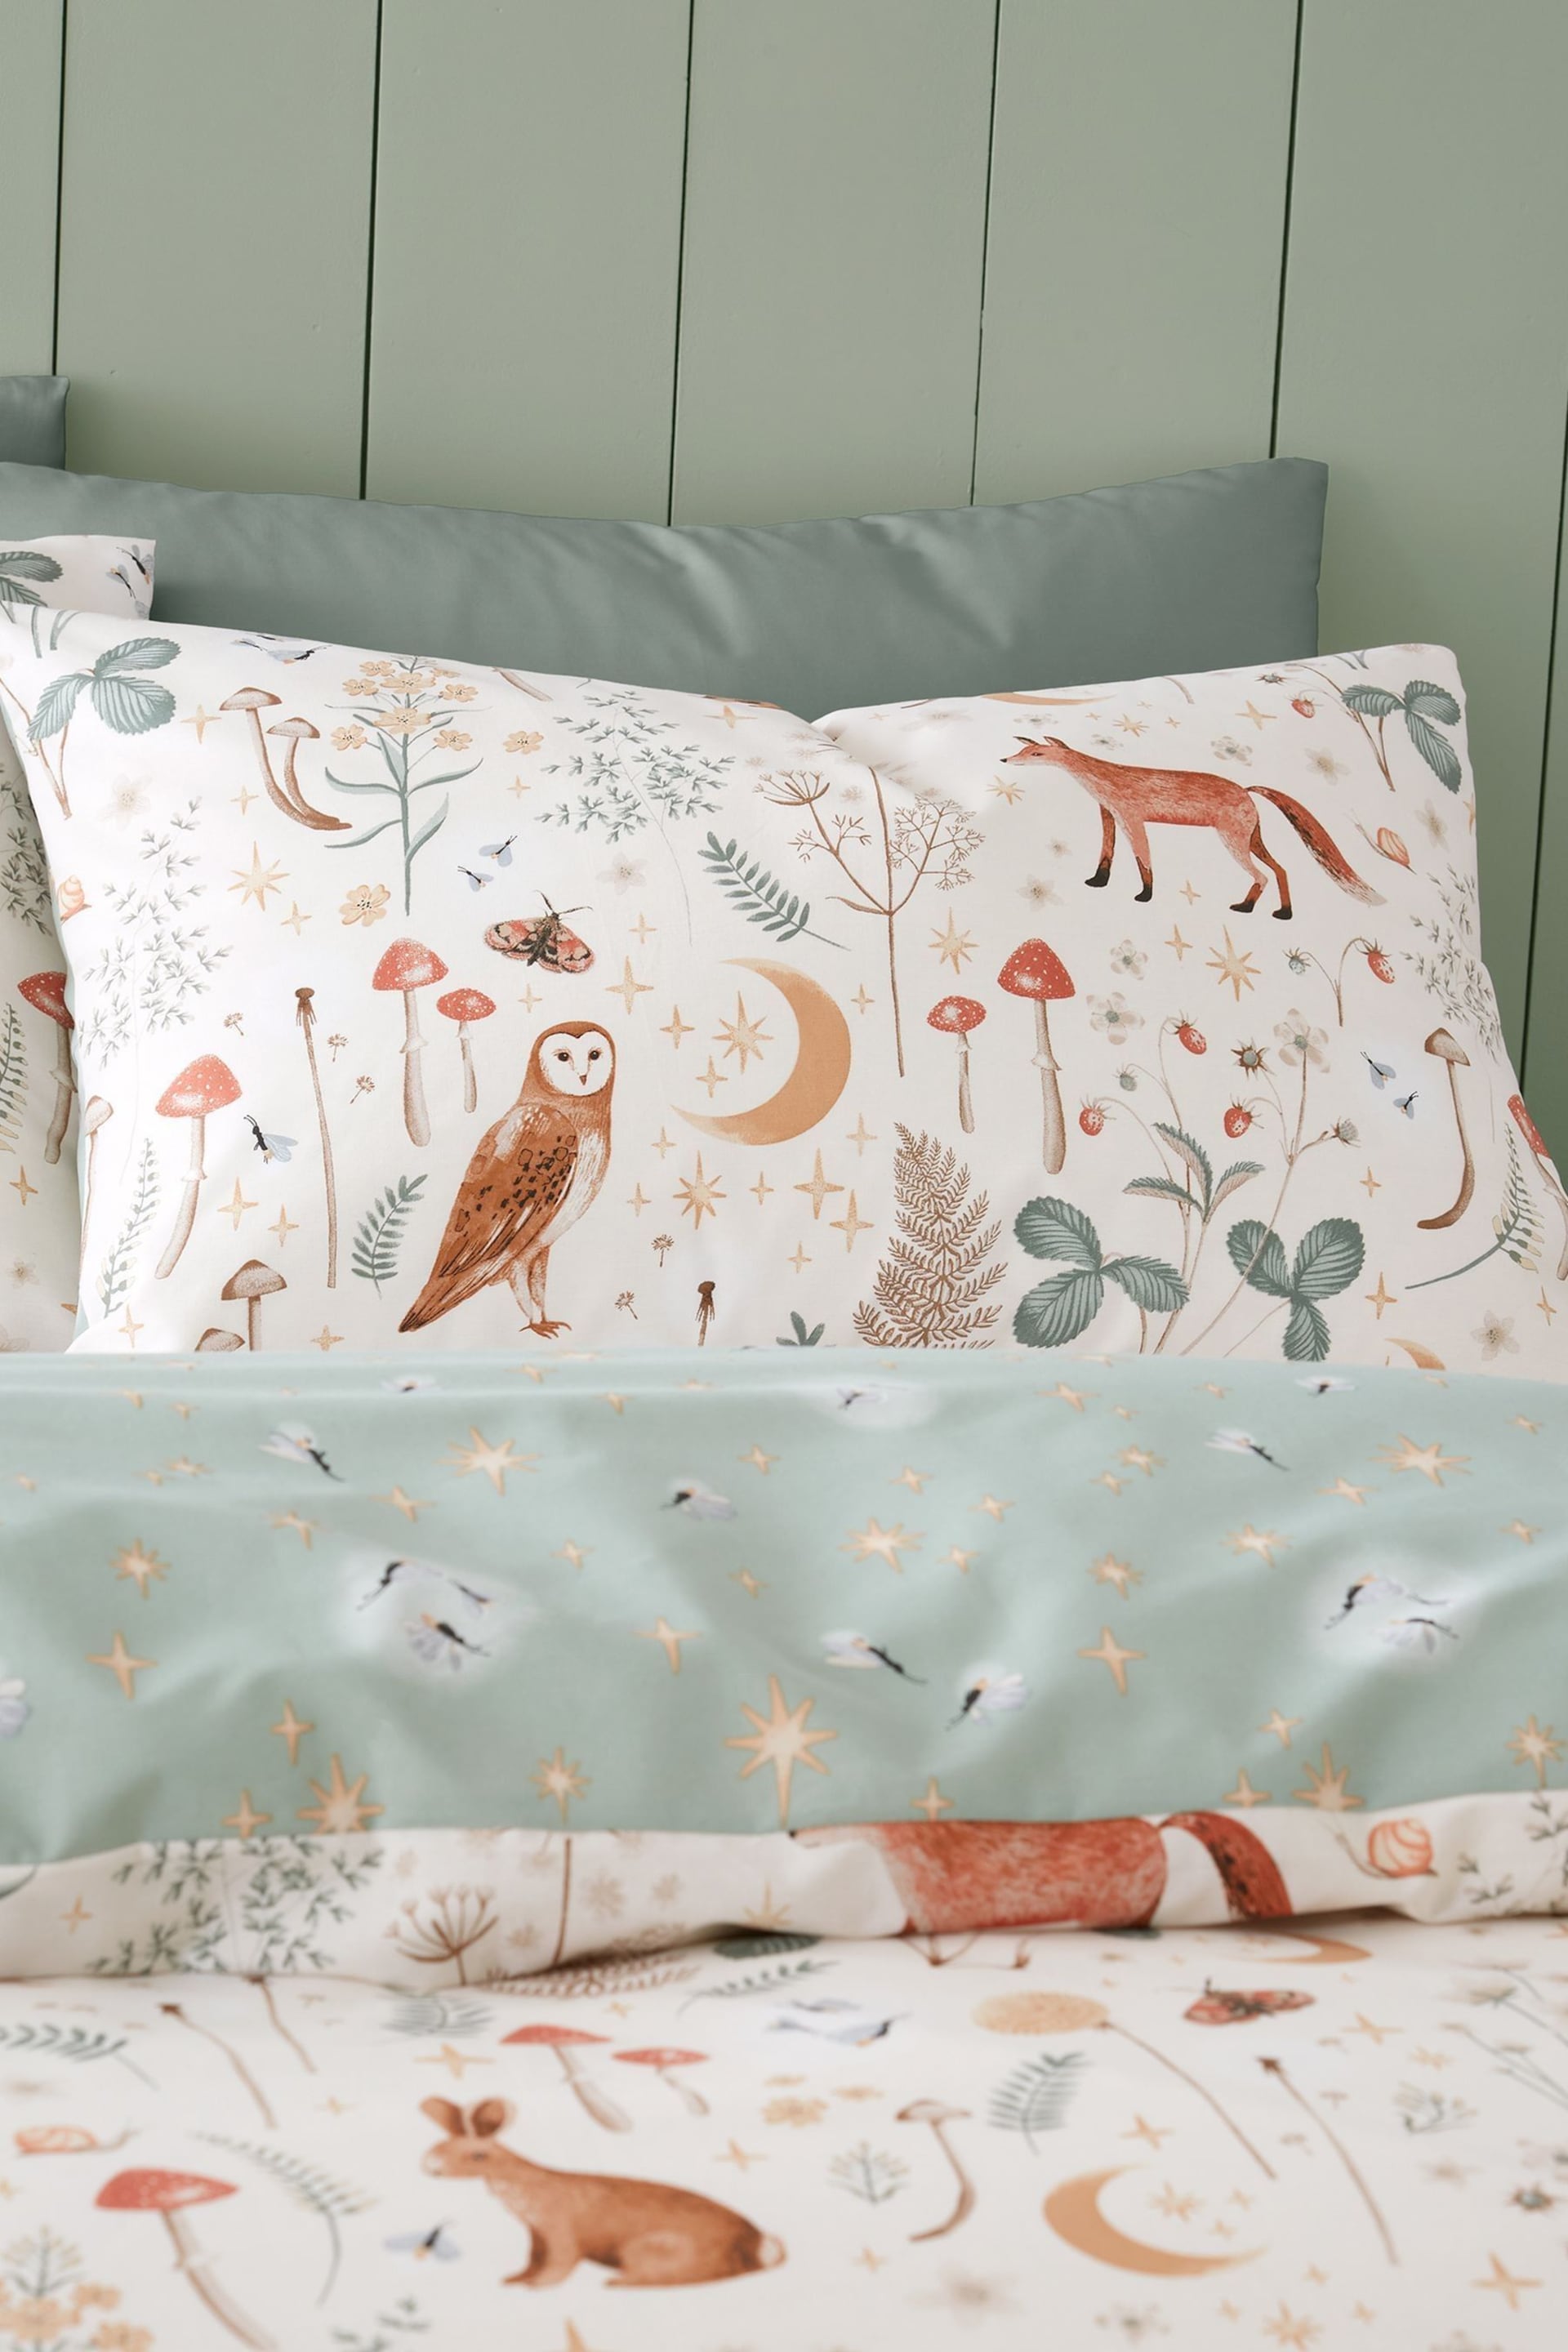 Catherine Lansfield Natural Enchanted Twilight Animals Print Duvet Cover Set - Image 3 of 5